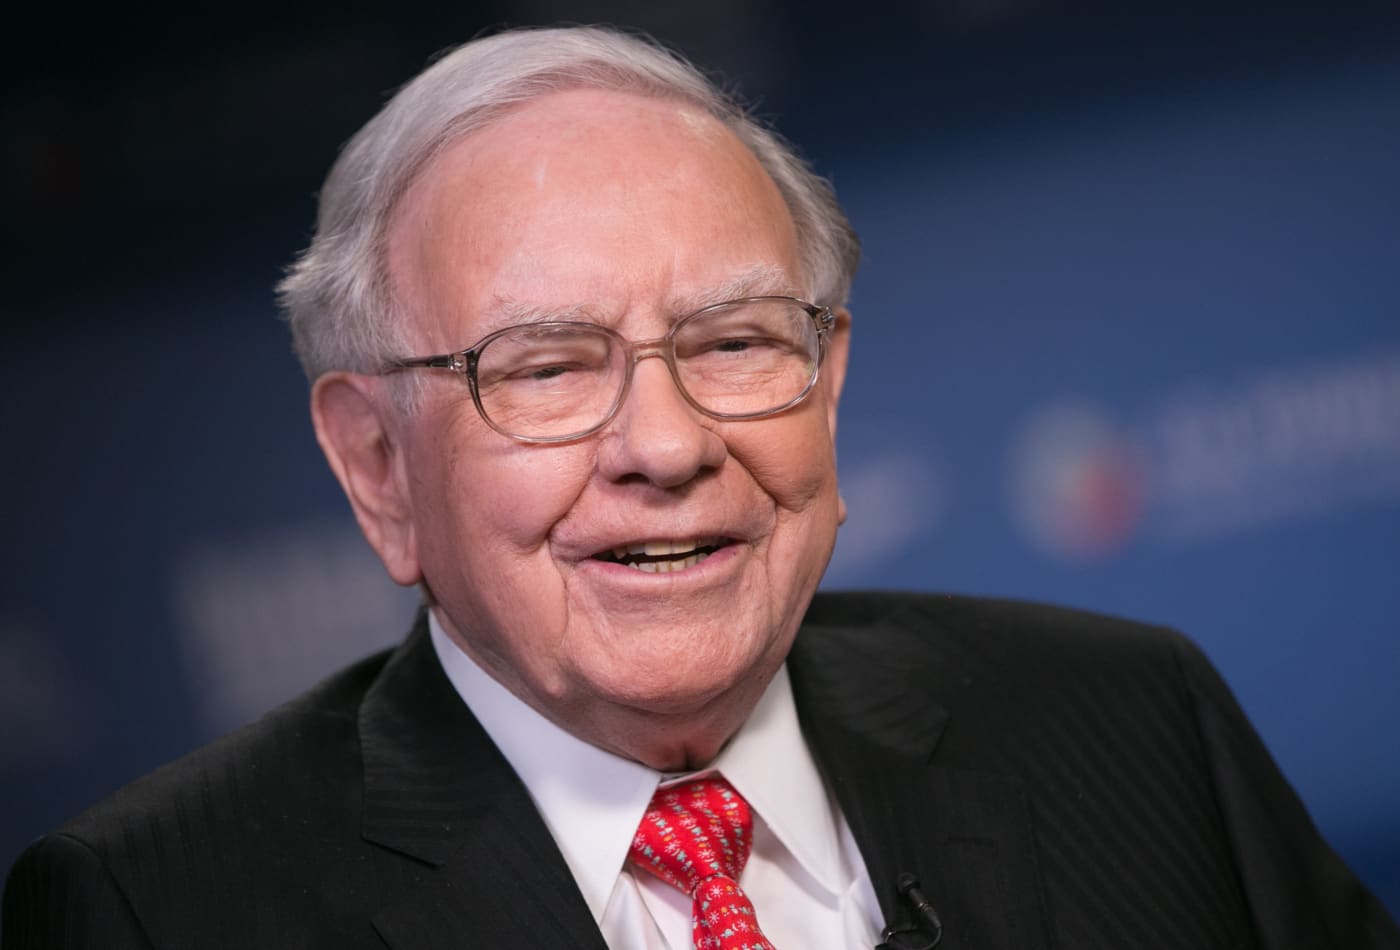 Warren Buffett: This is the greatest measure of success in life